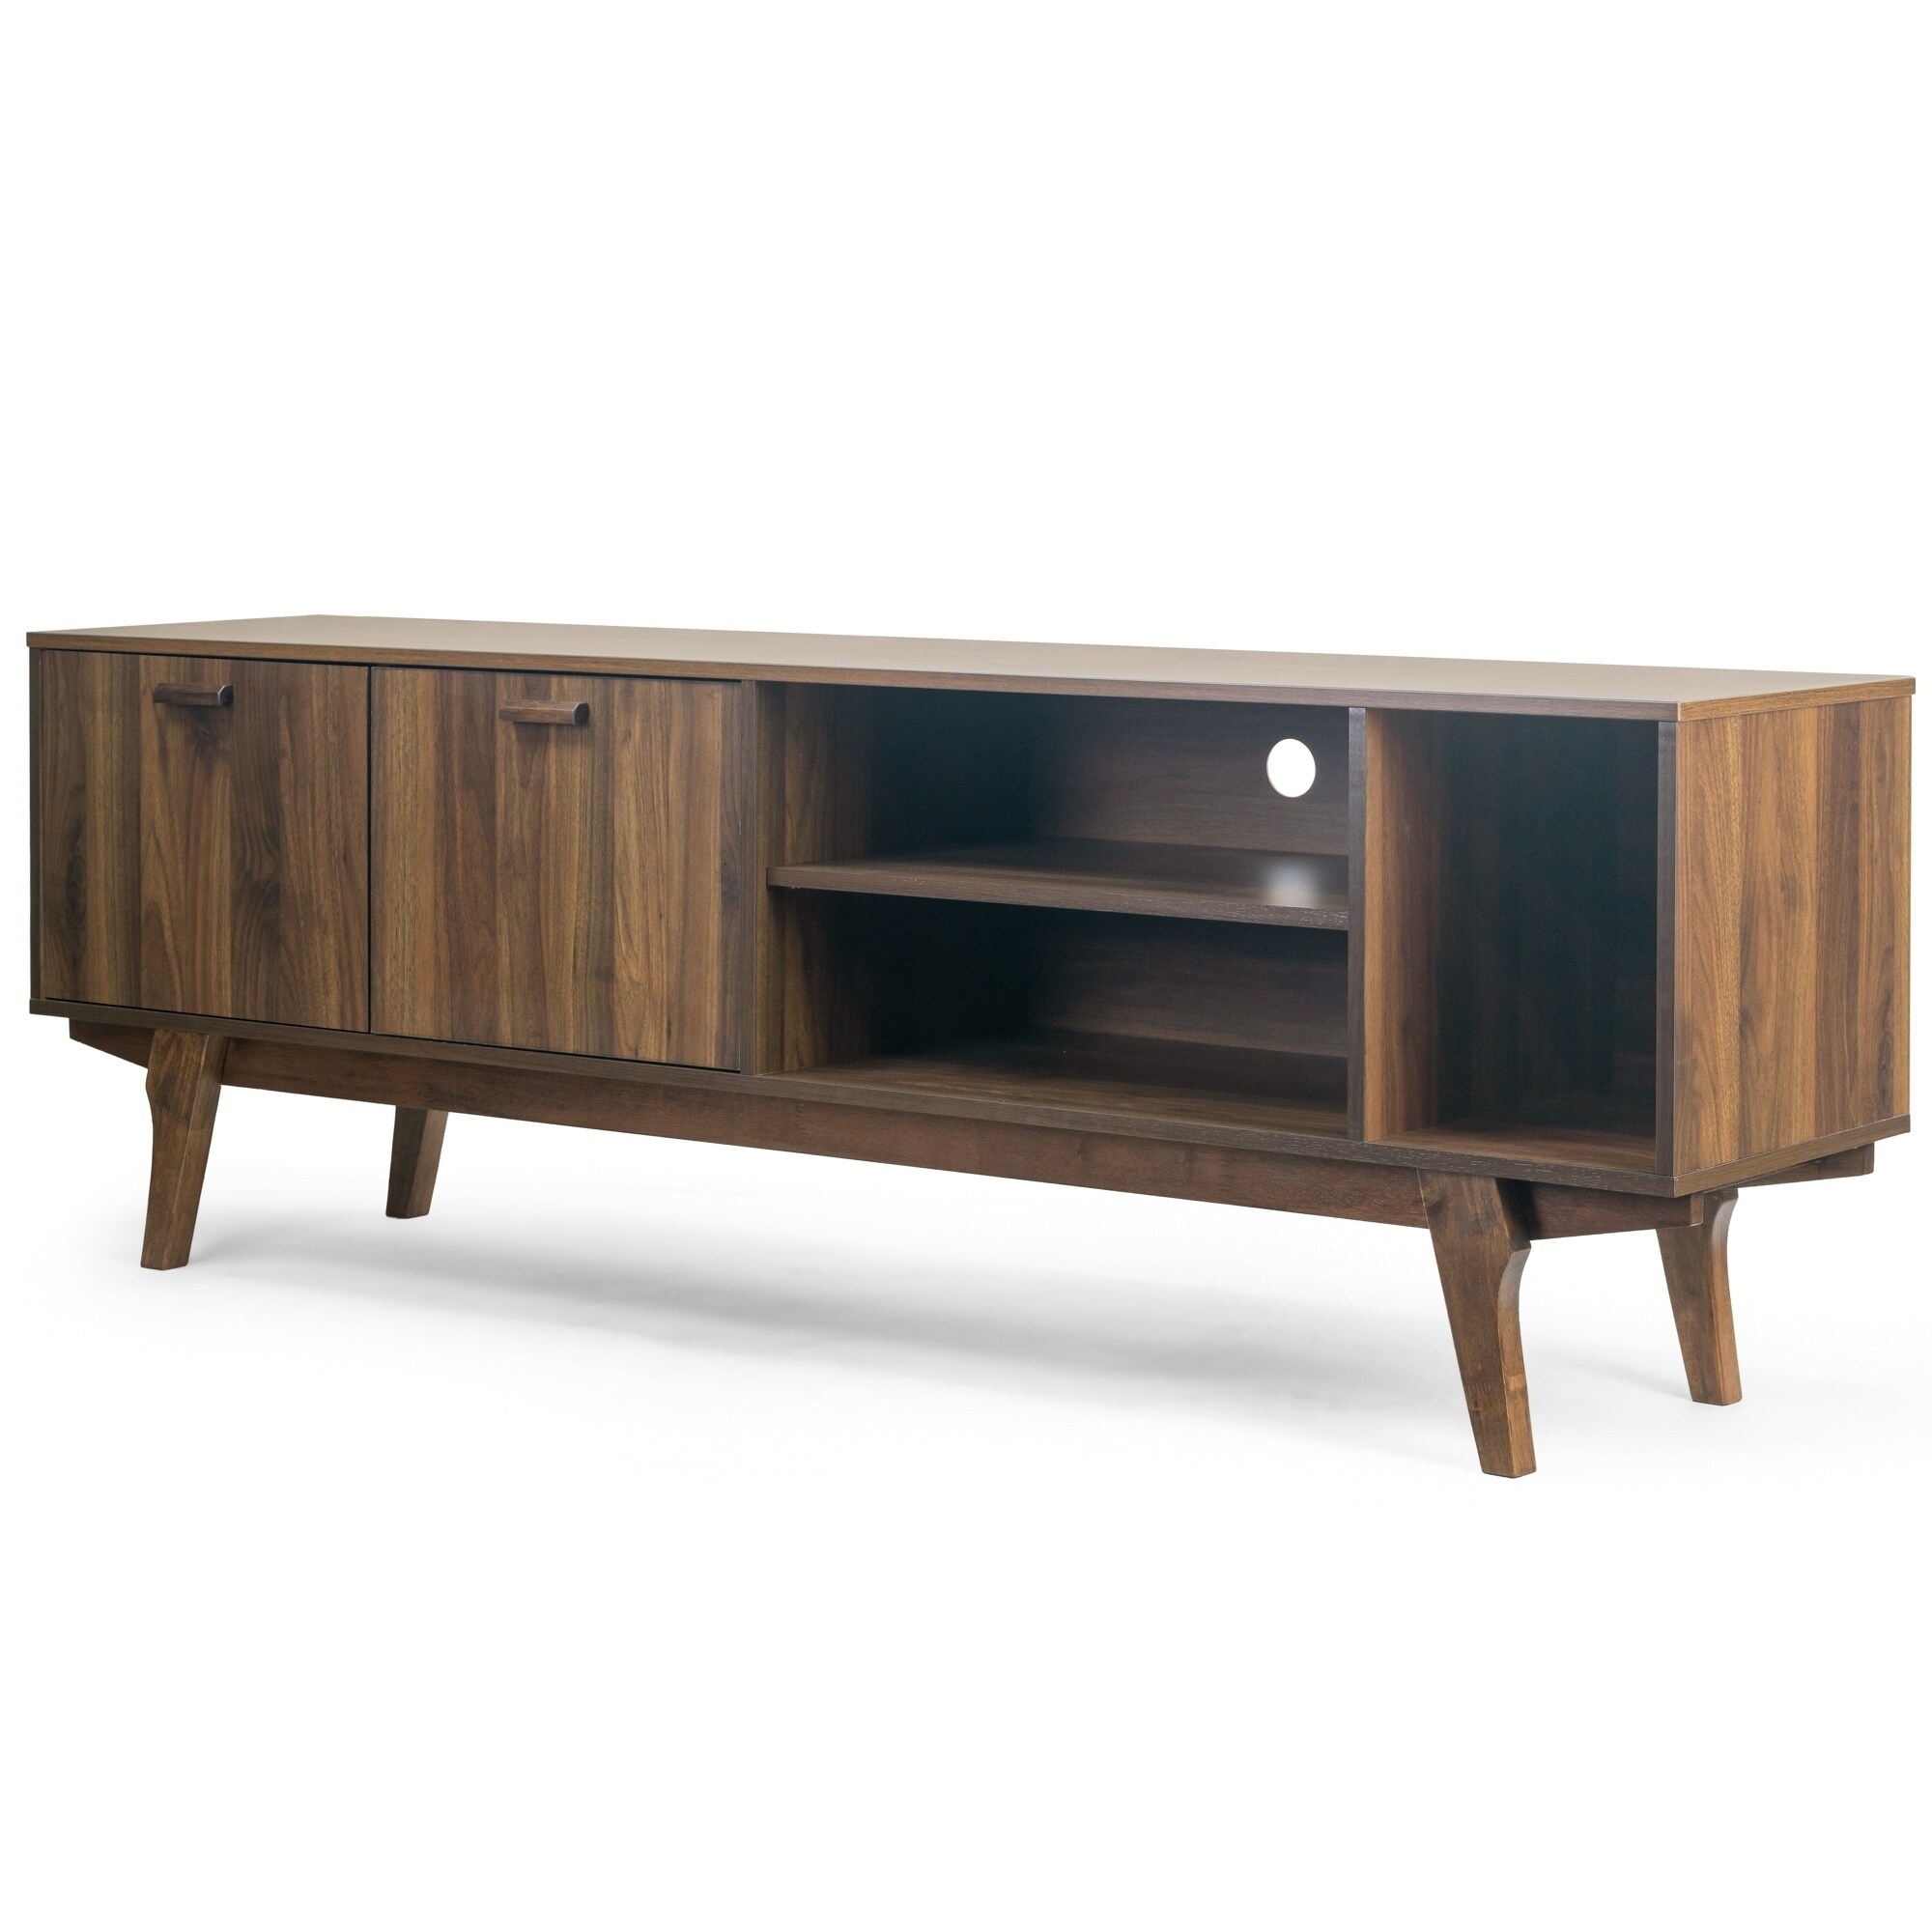 Shop Anona Tv Stand With Two Cabinets And Open Shelves On Sale